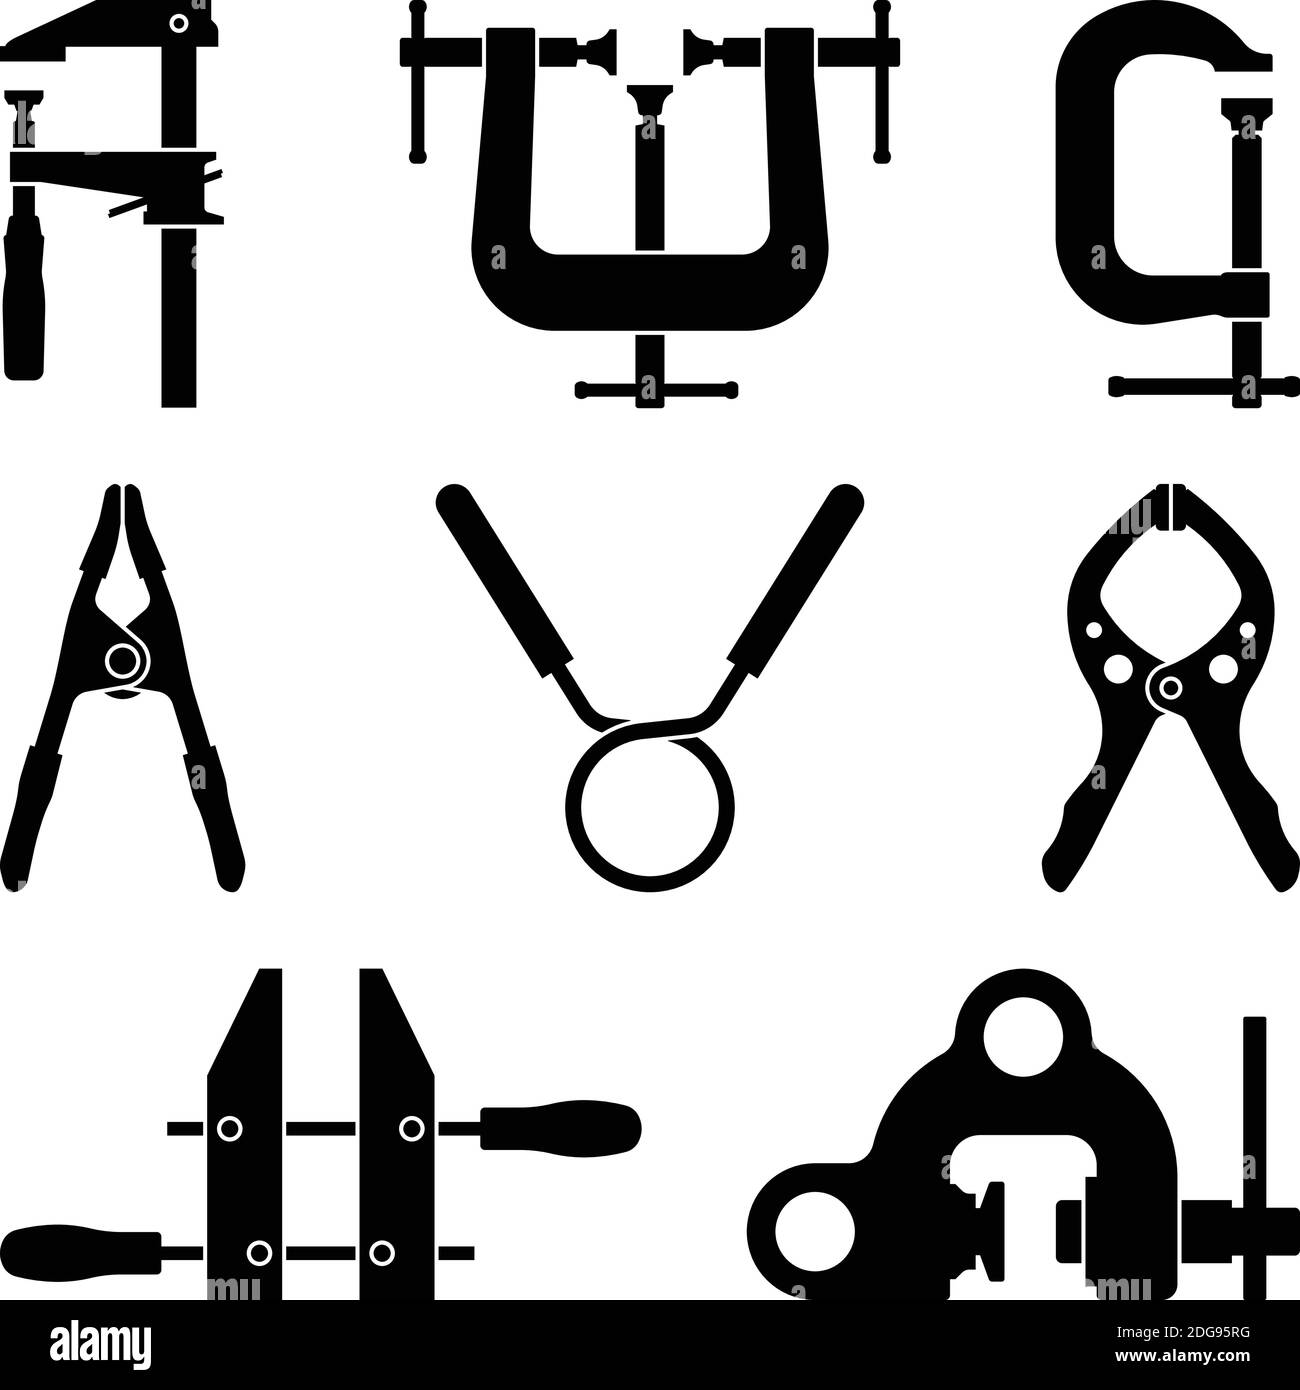 Clamp. Screw clamp. Hand tools. Silhouette icons Stock Vector